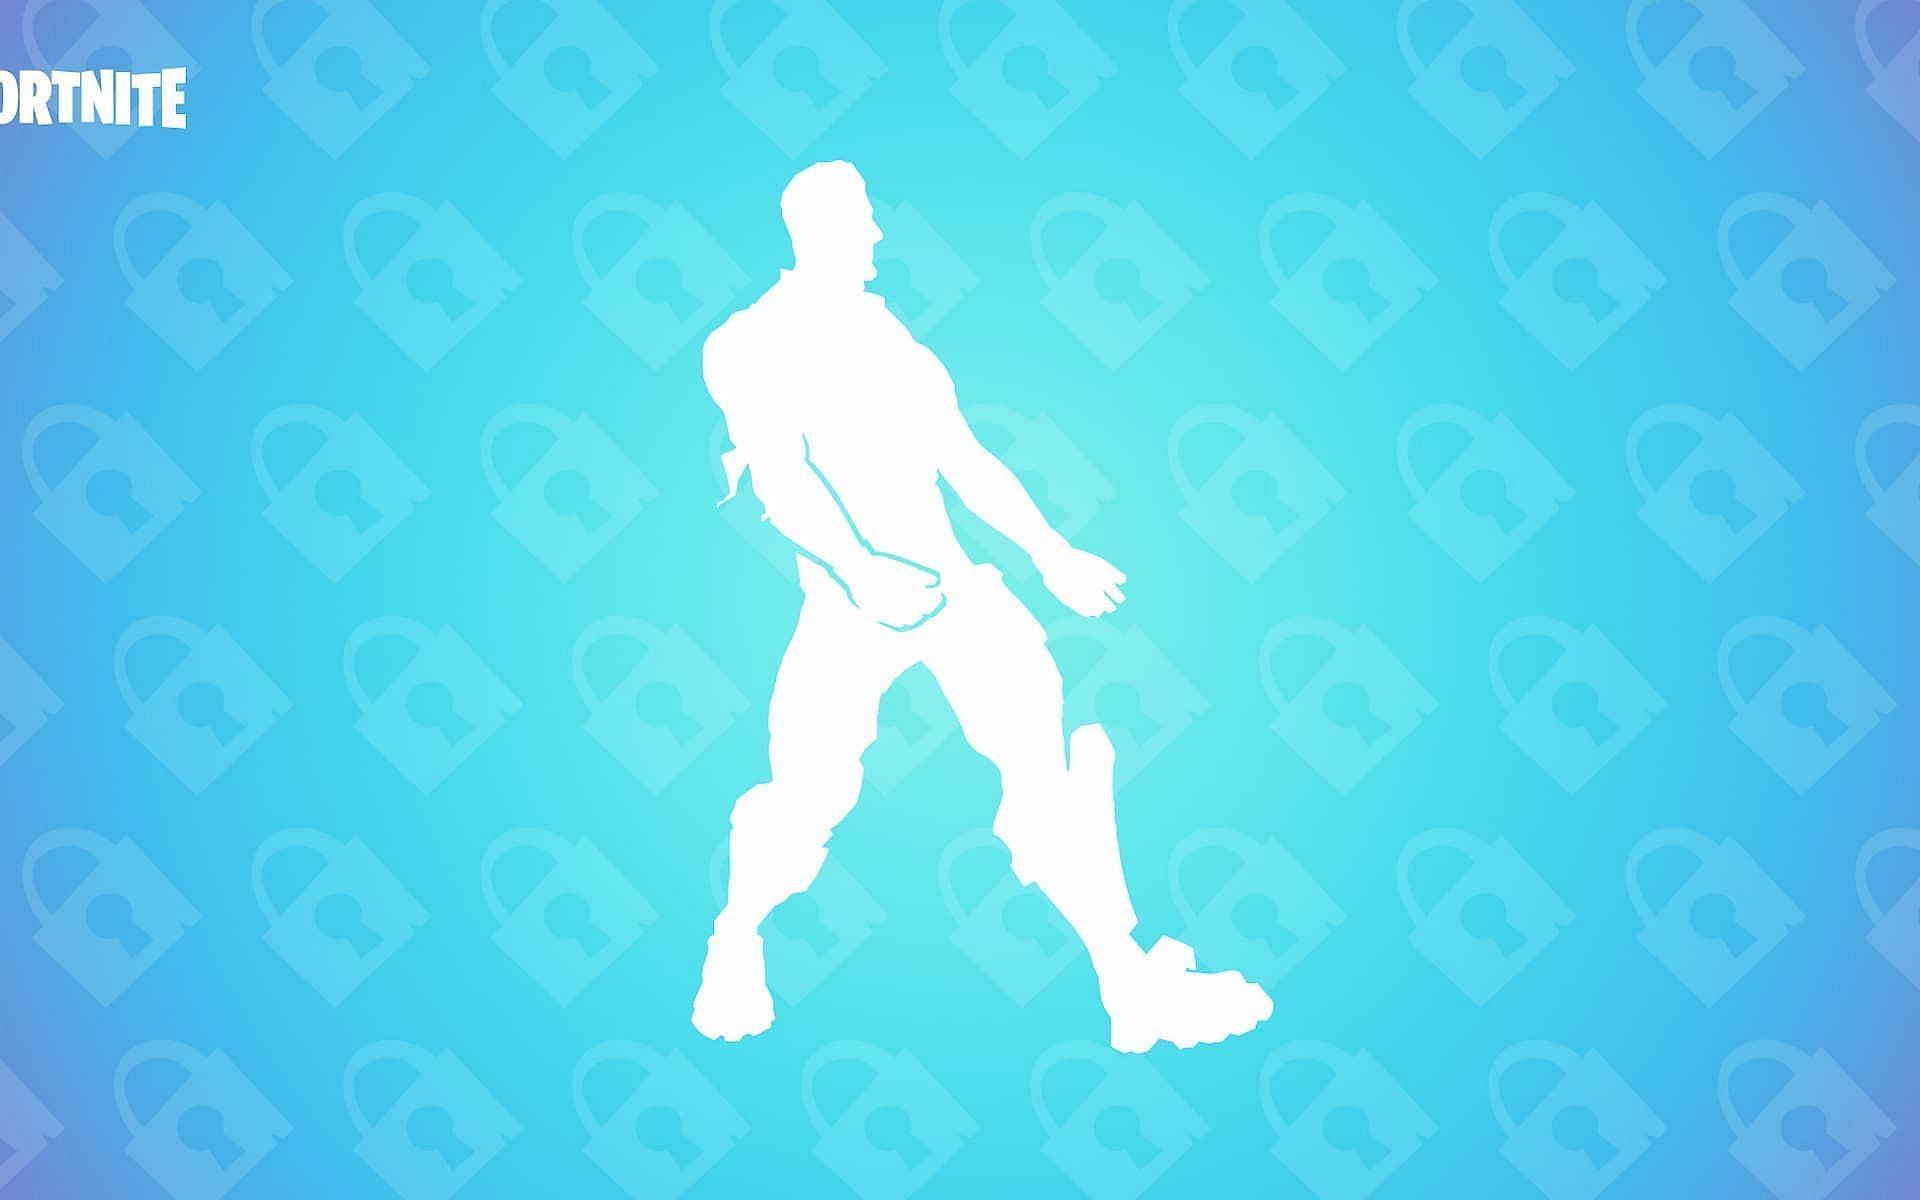 Fortnite players make their distaste for repetitive Icon series emotes clear